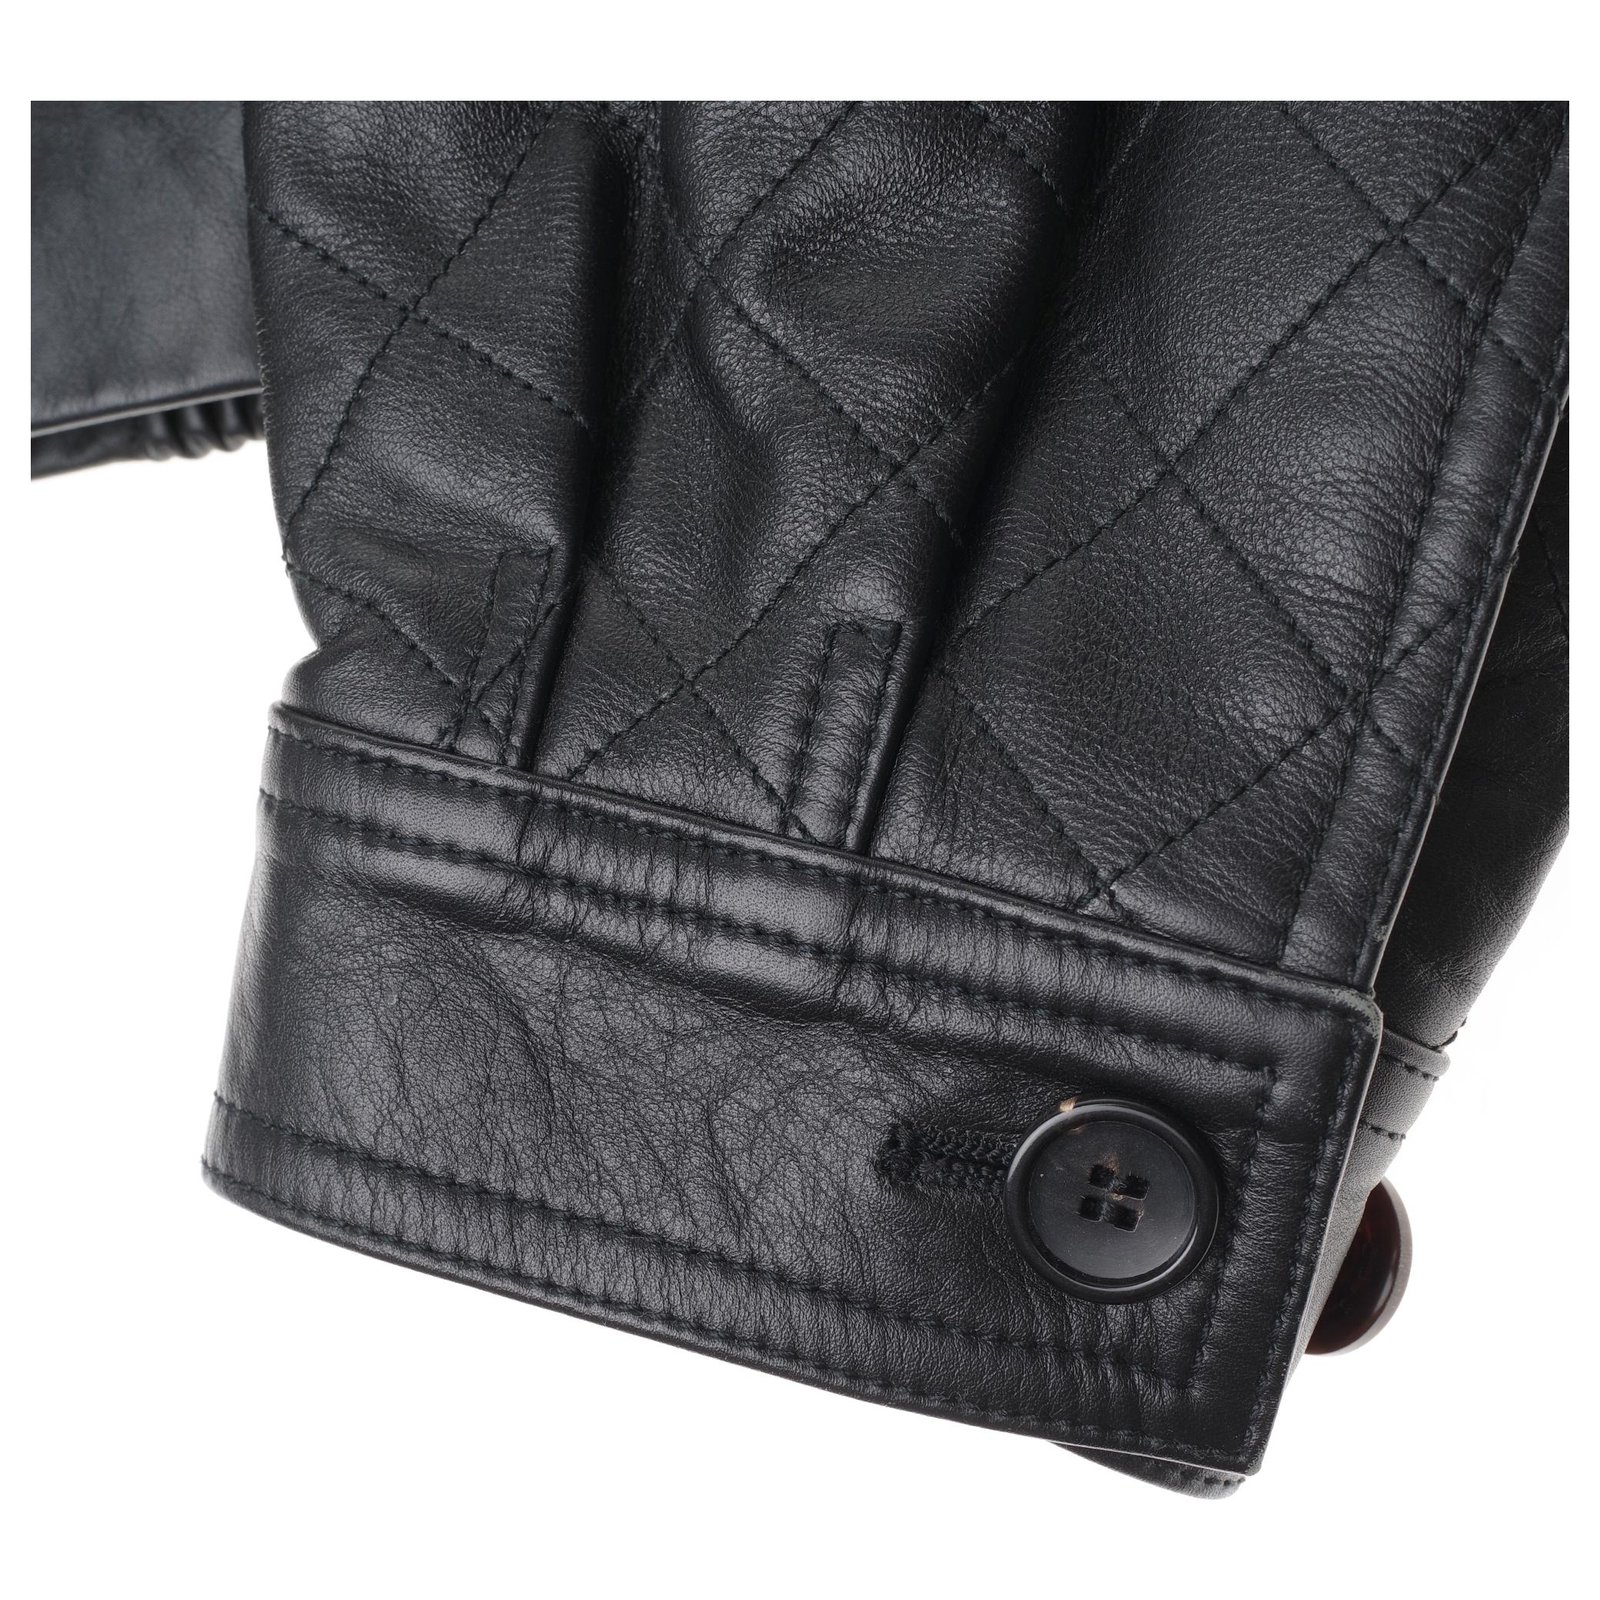 Superb Louis Vuitton Motard style jacket in black quilted leather, taille  52 ref.203795 - Joli Closet